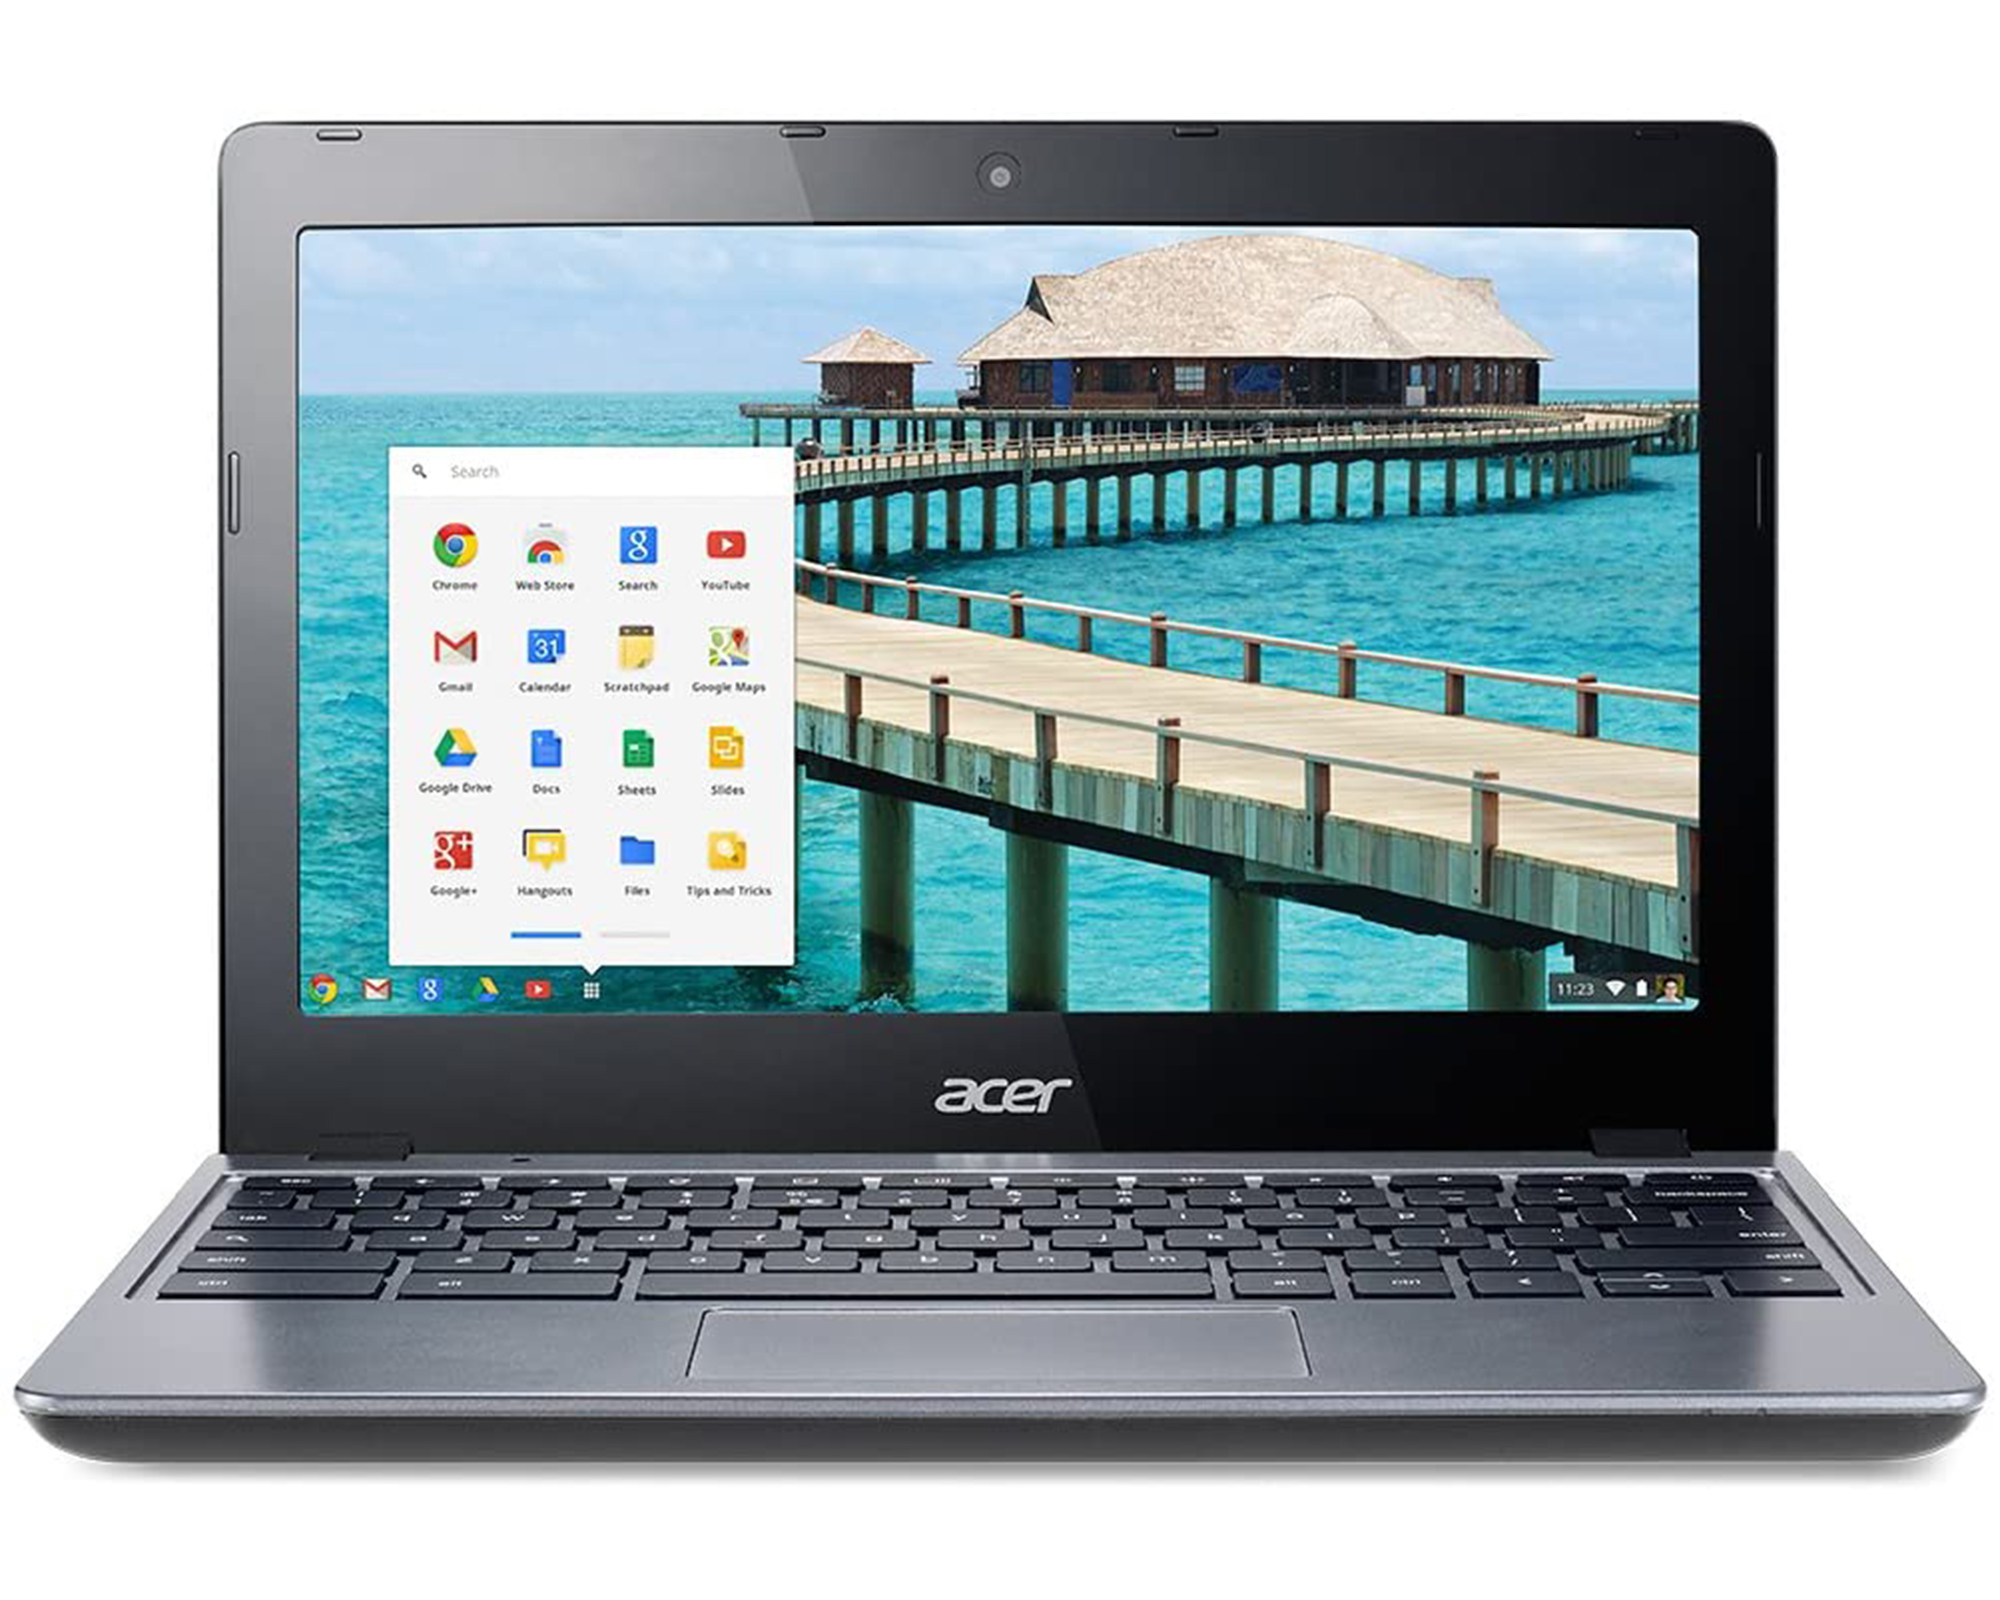 Restored Details about Acer C720-2103 11.6 in chromebook, Intel Celeron 1.4GHz 2GB Ram - image 3 of 8